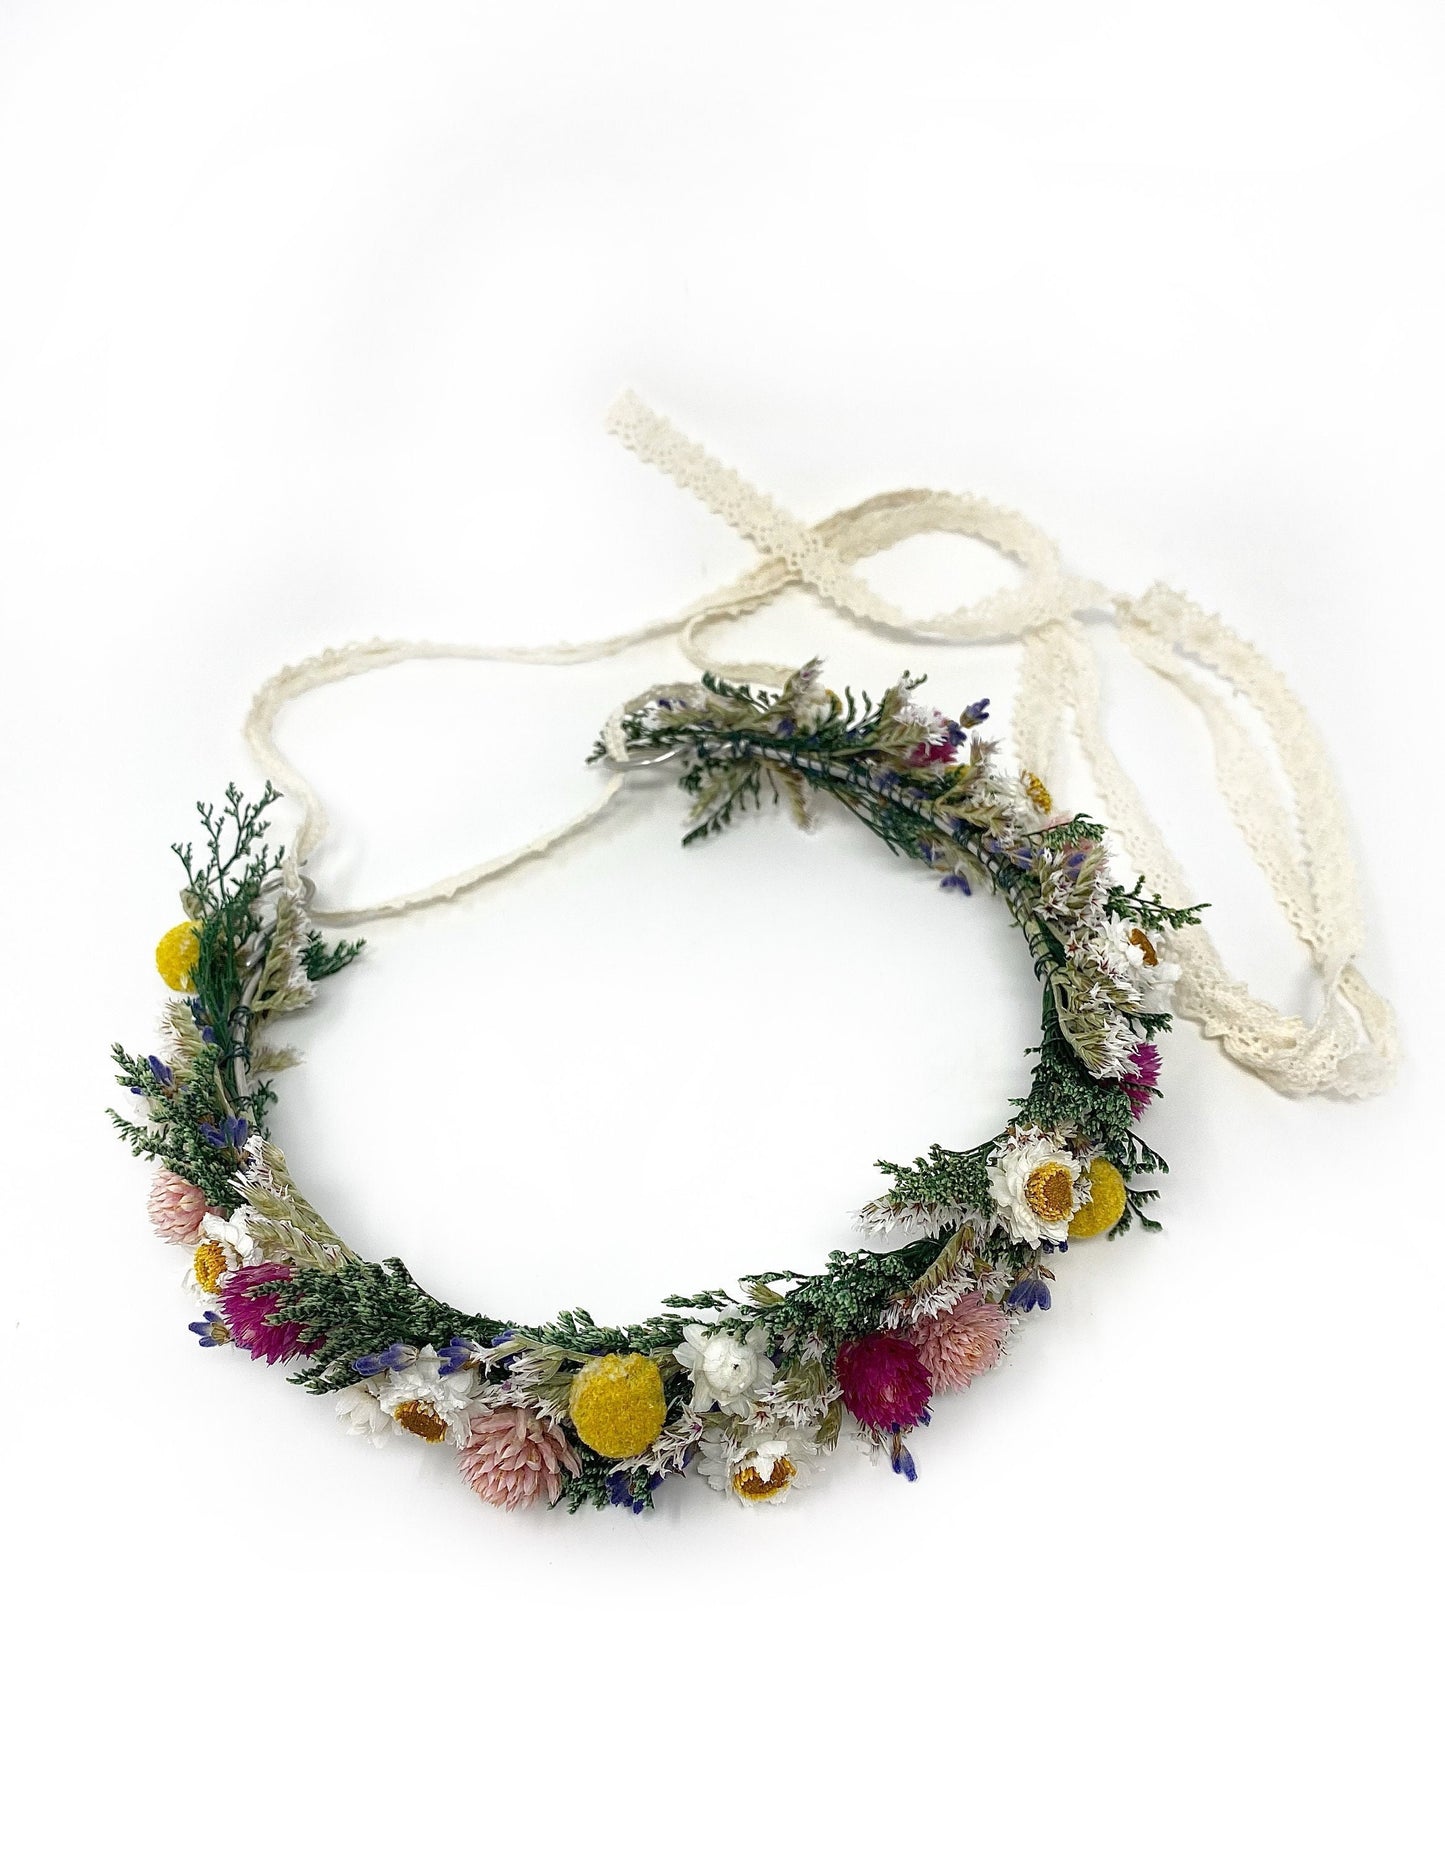 Wedding Head Wreath, Crown, Hoop, Wall Wreath, Halo, Boho, Wild Flower, Floral, Dried Flowers, Simple, Rustic, Preserved, Whimsical, Forest